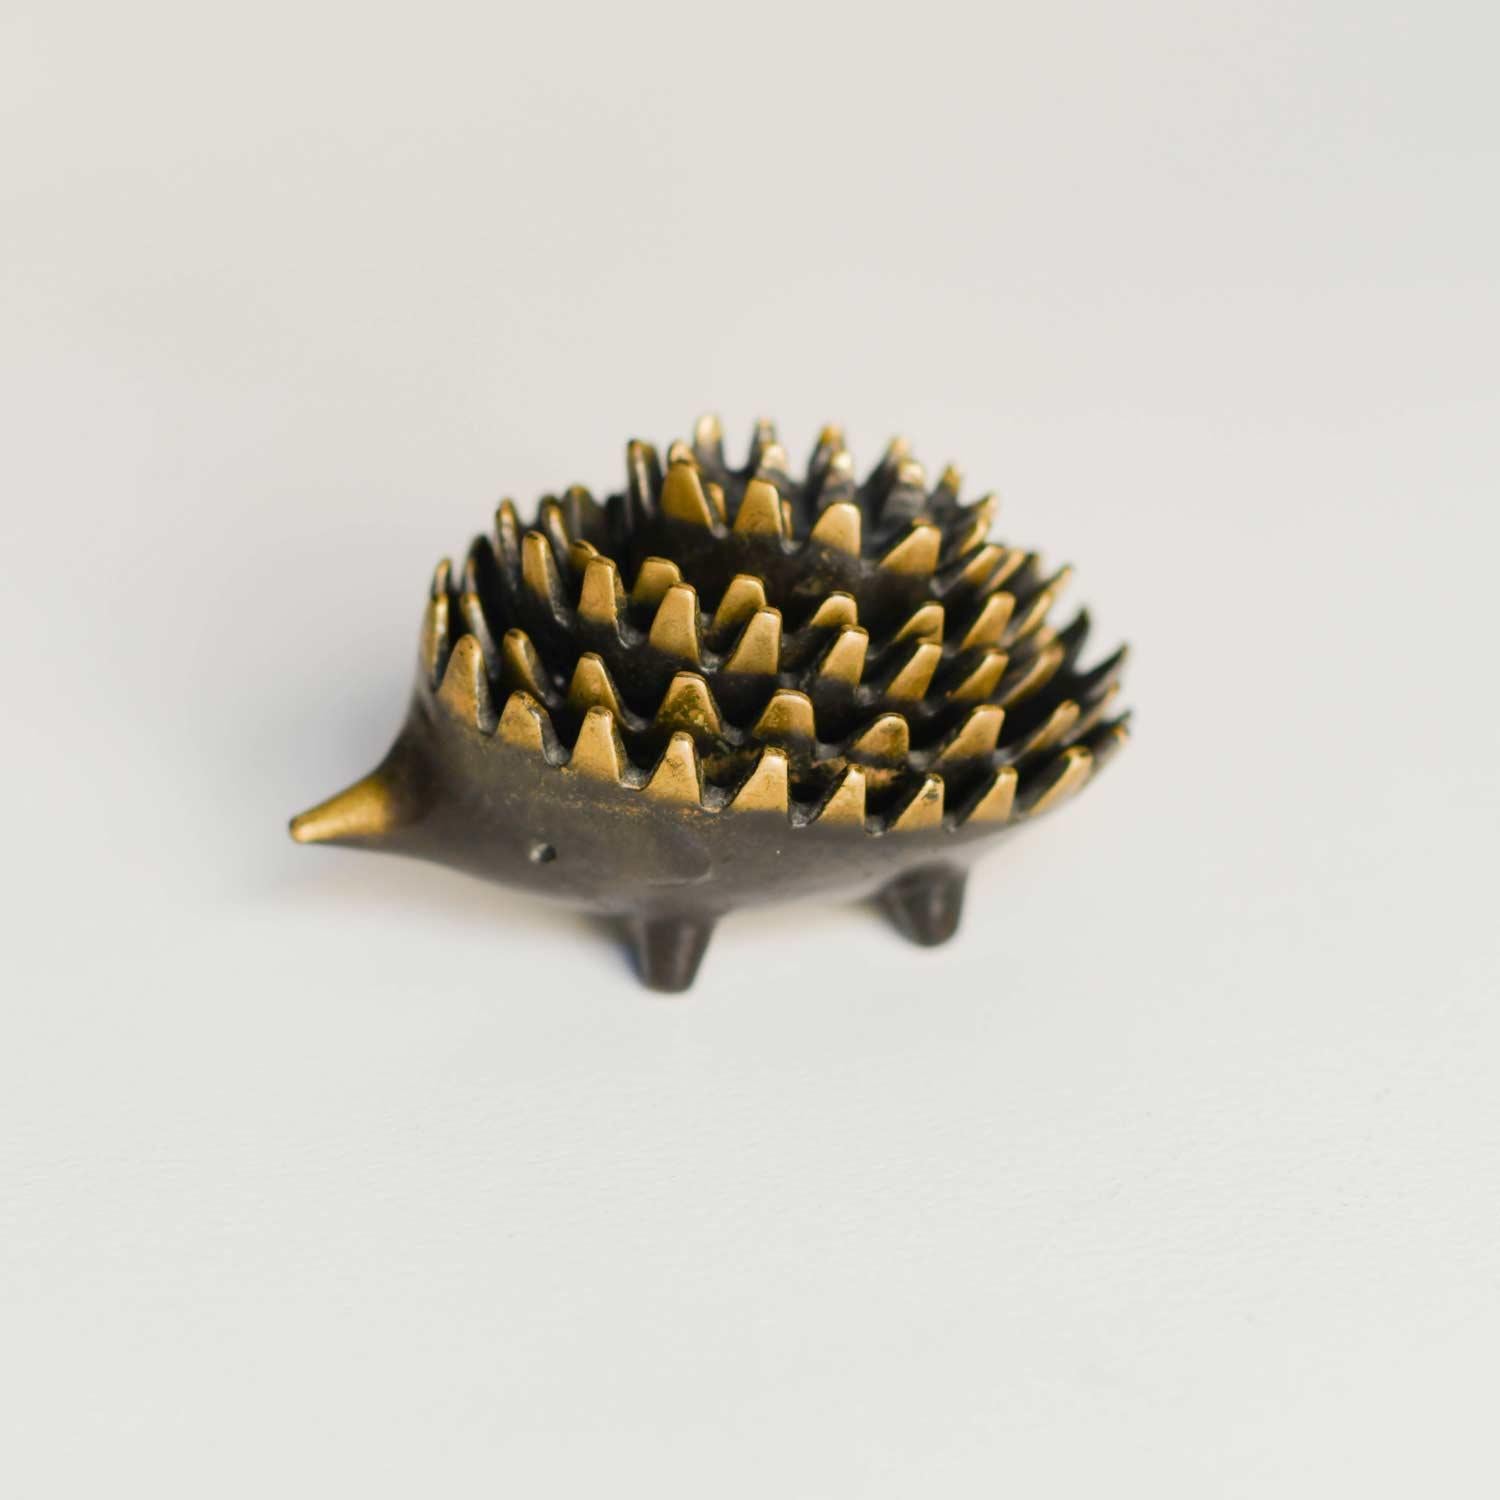 Hedgehog Ashtray Set by Walter Bosse for Hertha Bellerlo, Austria 1950. 
Made of brass. The set consists of 6 ashtrays
Product details
Dimensions: 11.5 l x 7.5 h x 7 d cm
Materials : brass
Production : Hertha Bellerlo, Austria 1950.